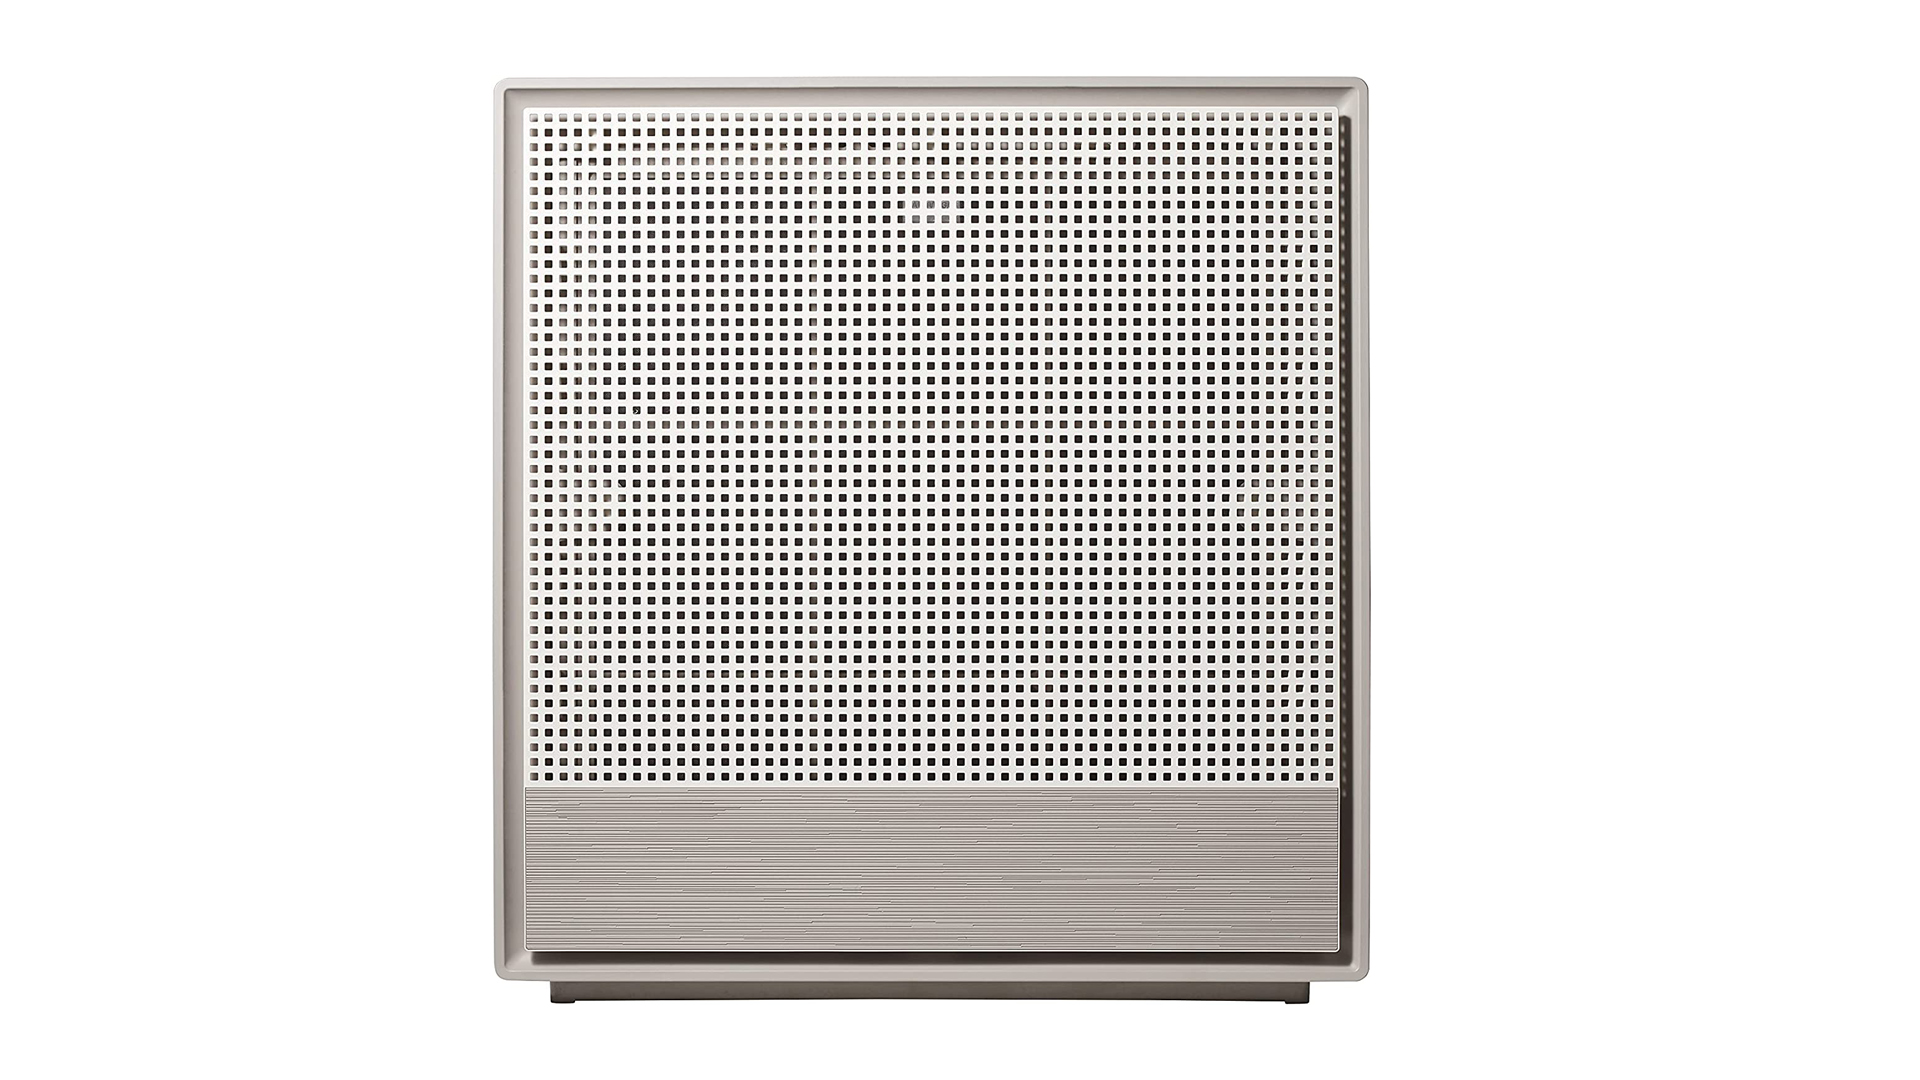 Air purifiers for allergies: Image of Coway Mega air purifier